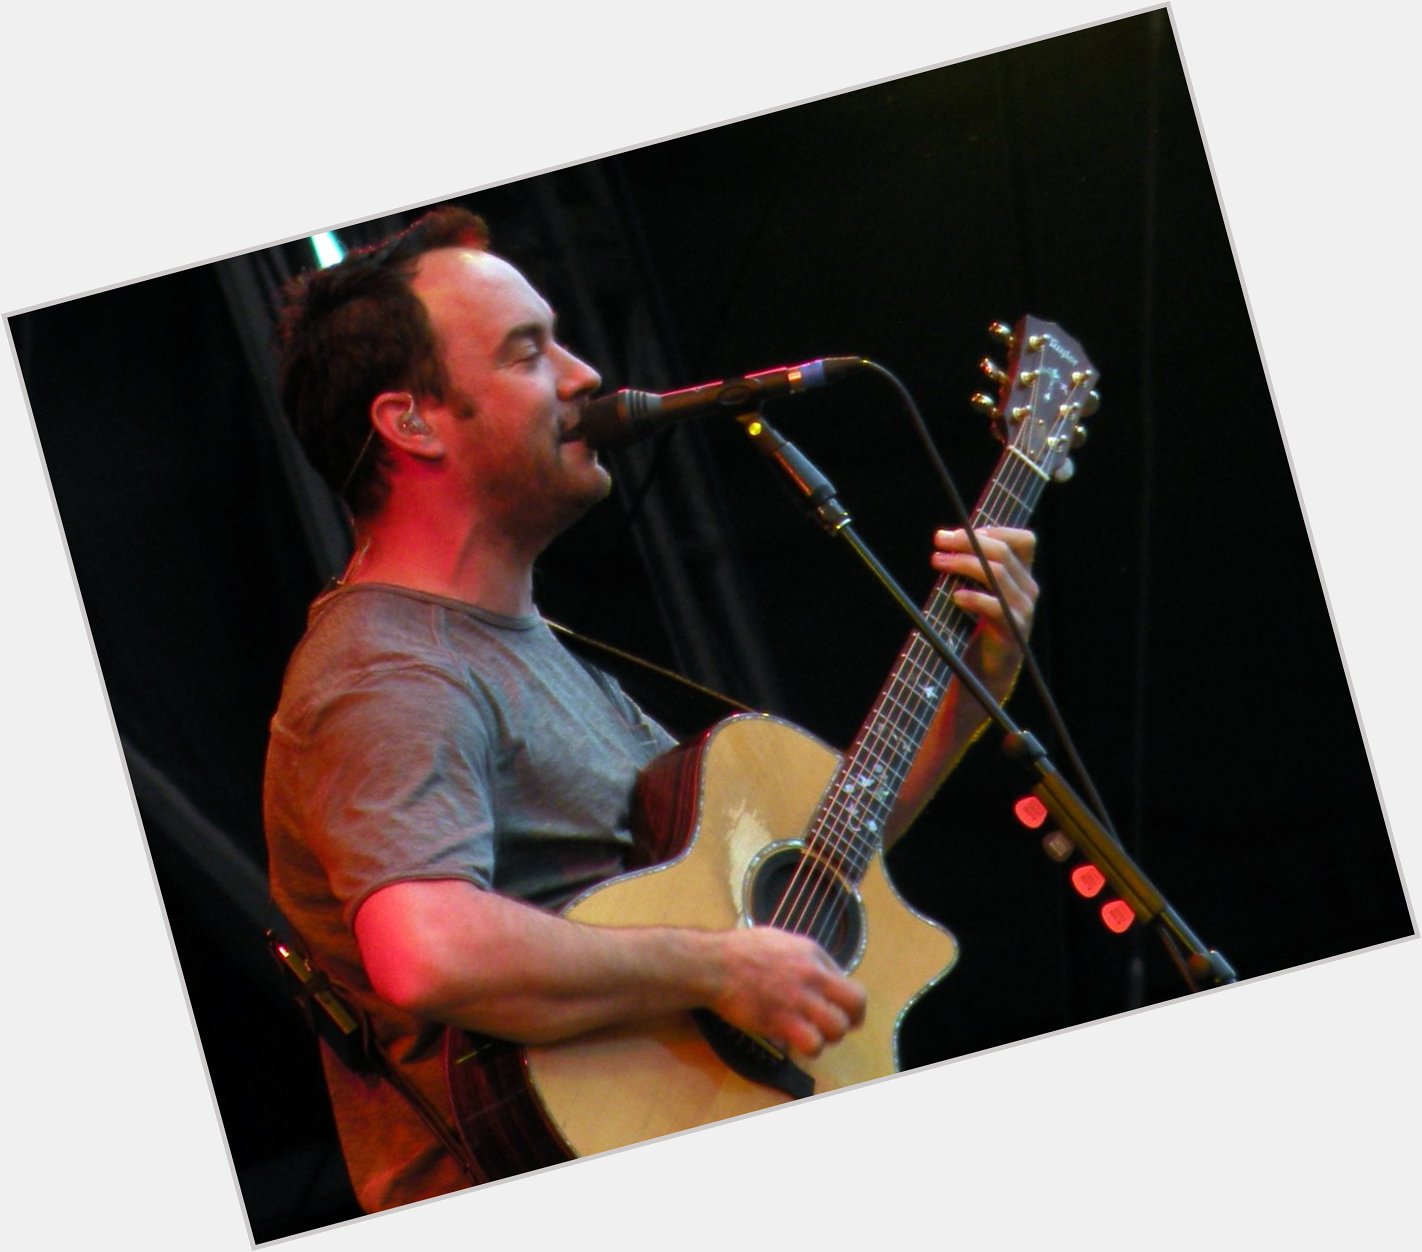 Please join me here at in wishing the one and only Dave Matthews a very Happy 53rd Birthday today  